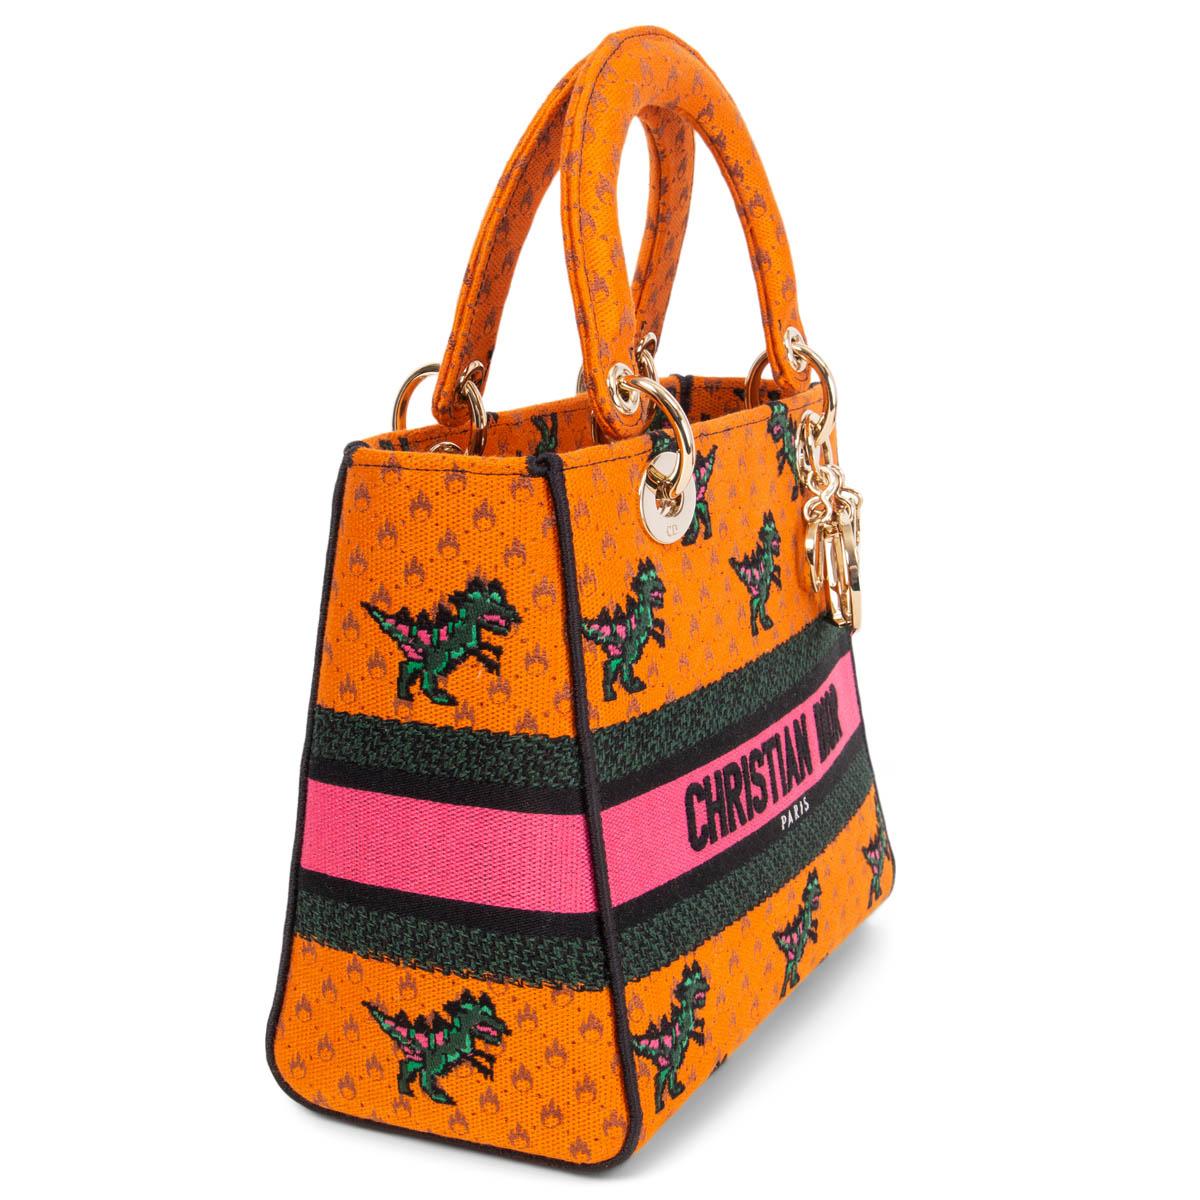 100% authentic Christian Dior 2021 Lady D-Lite Medium tote in orange dragon and fire embroidered canvas with gold-tone hardware. Closes with a flap and magnetic snap on top. Unlined with an open pocket against the front and a zipper pocket against